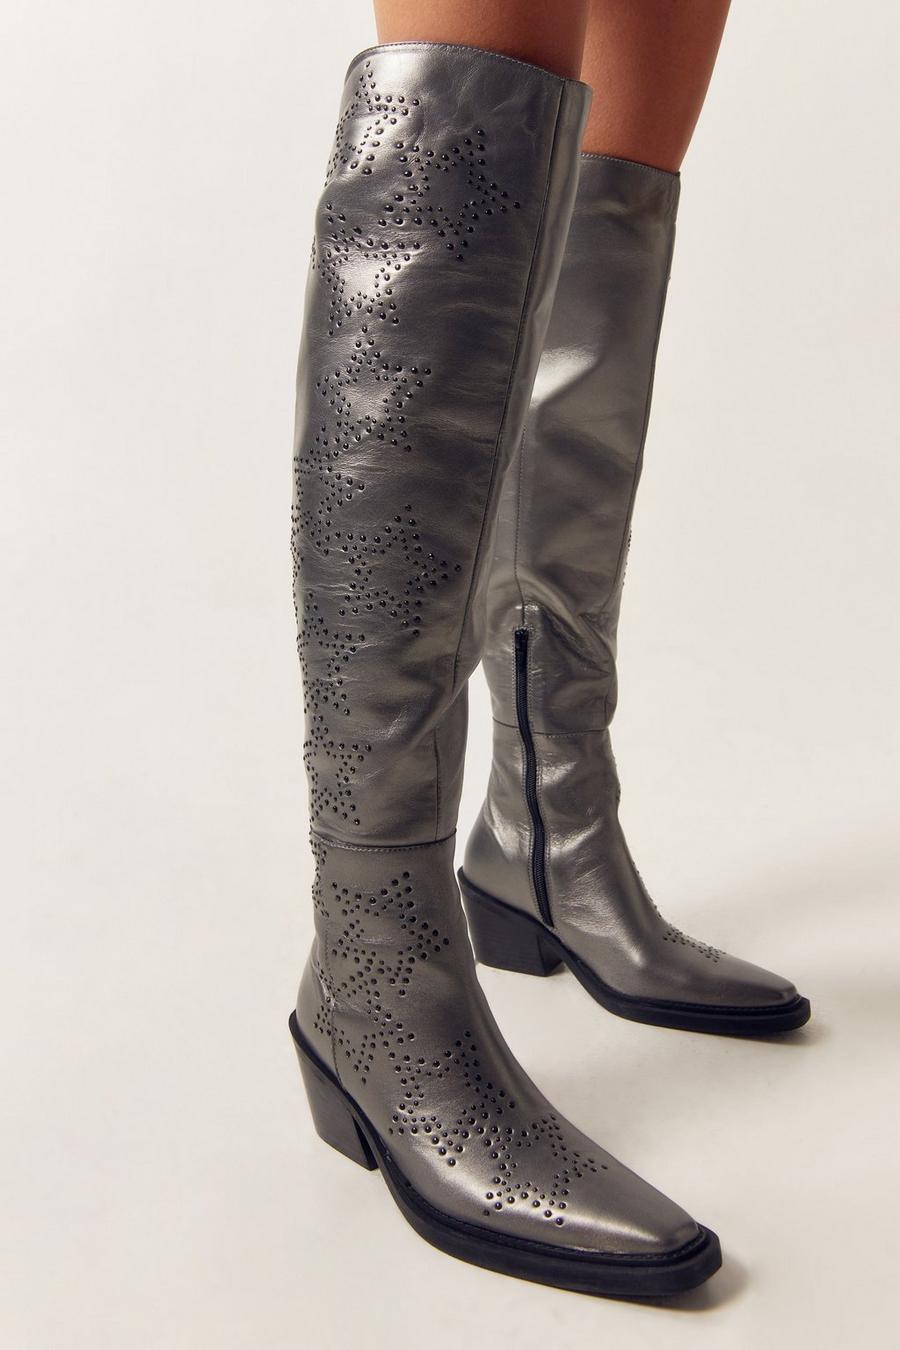 Gun metal Real Leather Metallic Star Studed Over The Knee Cowboy Boots